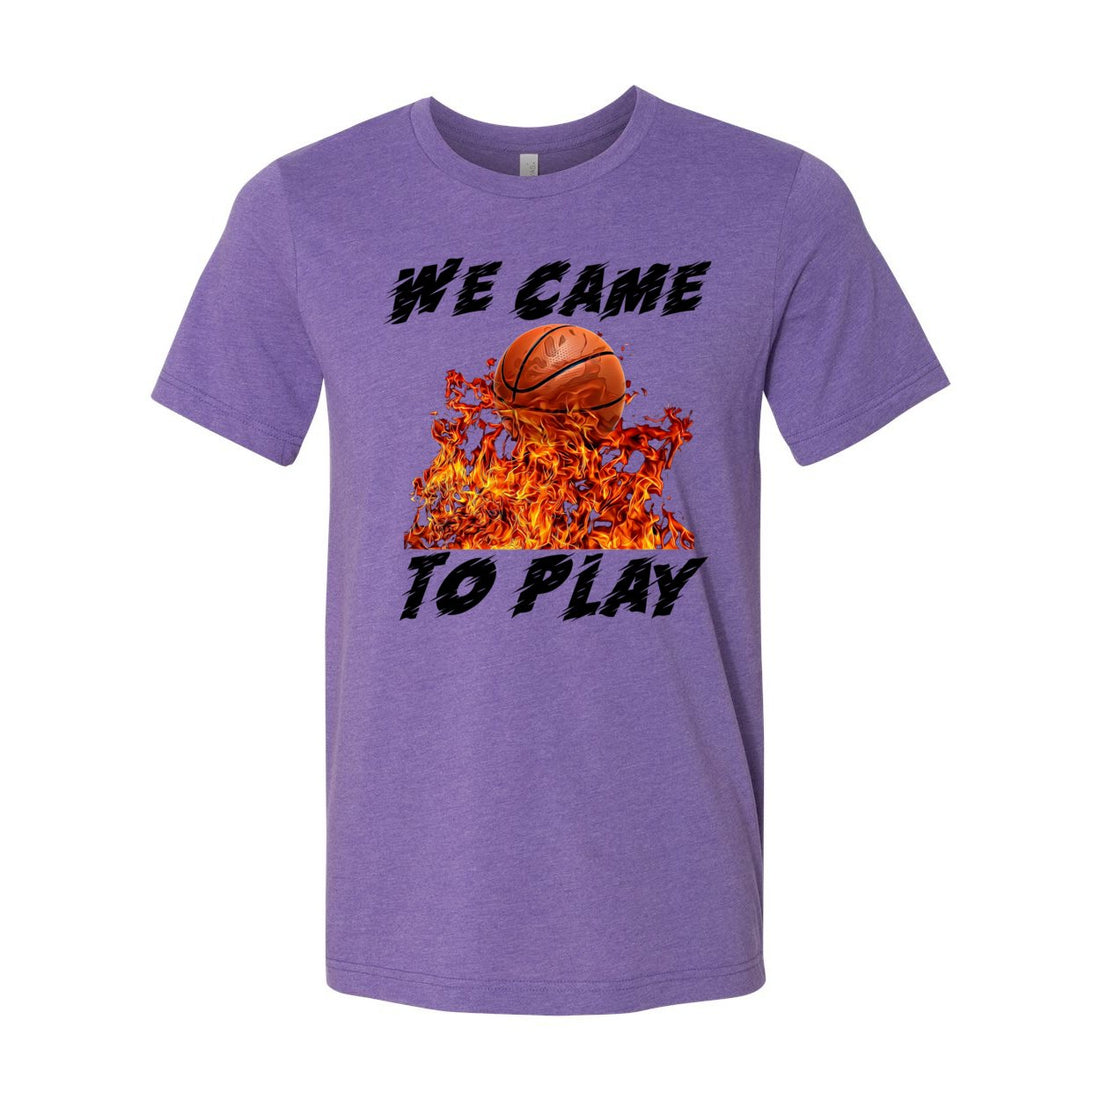 We Came To Play Short Sleeve Jersey Tee - T-Shirts - Positively Sassy - We Came To Play Short Sleeve Jersey Tee